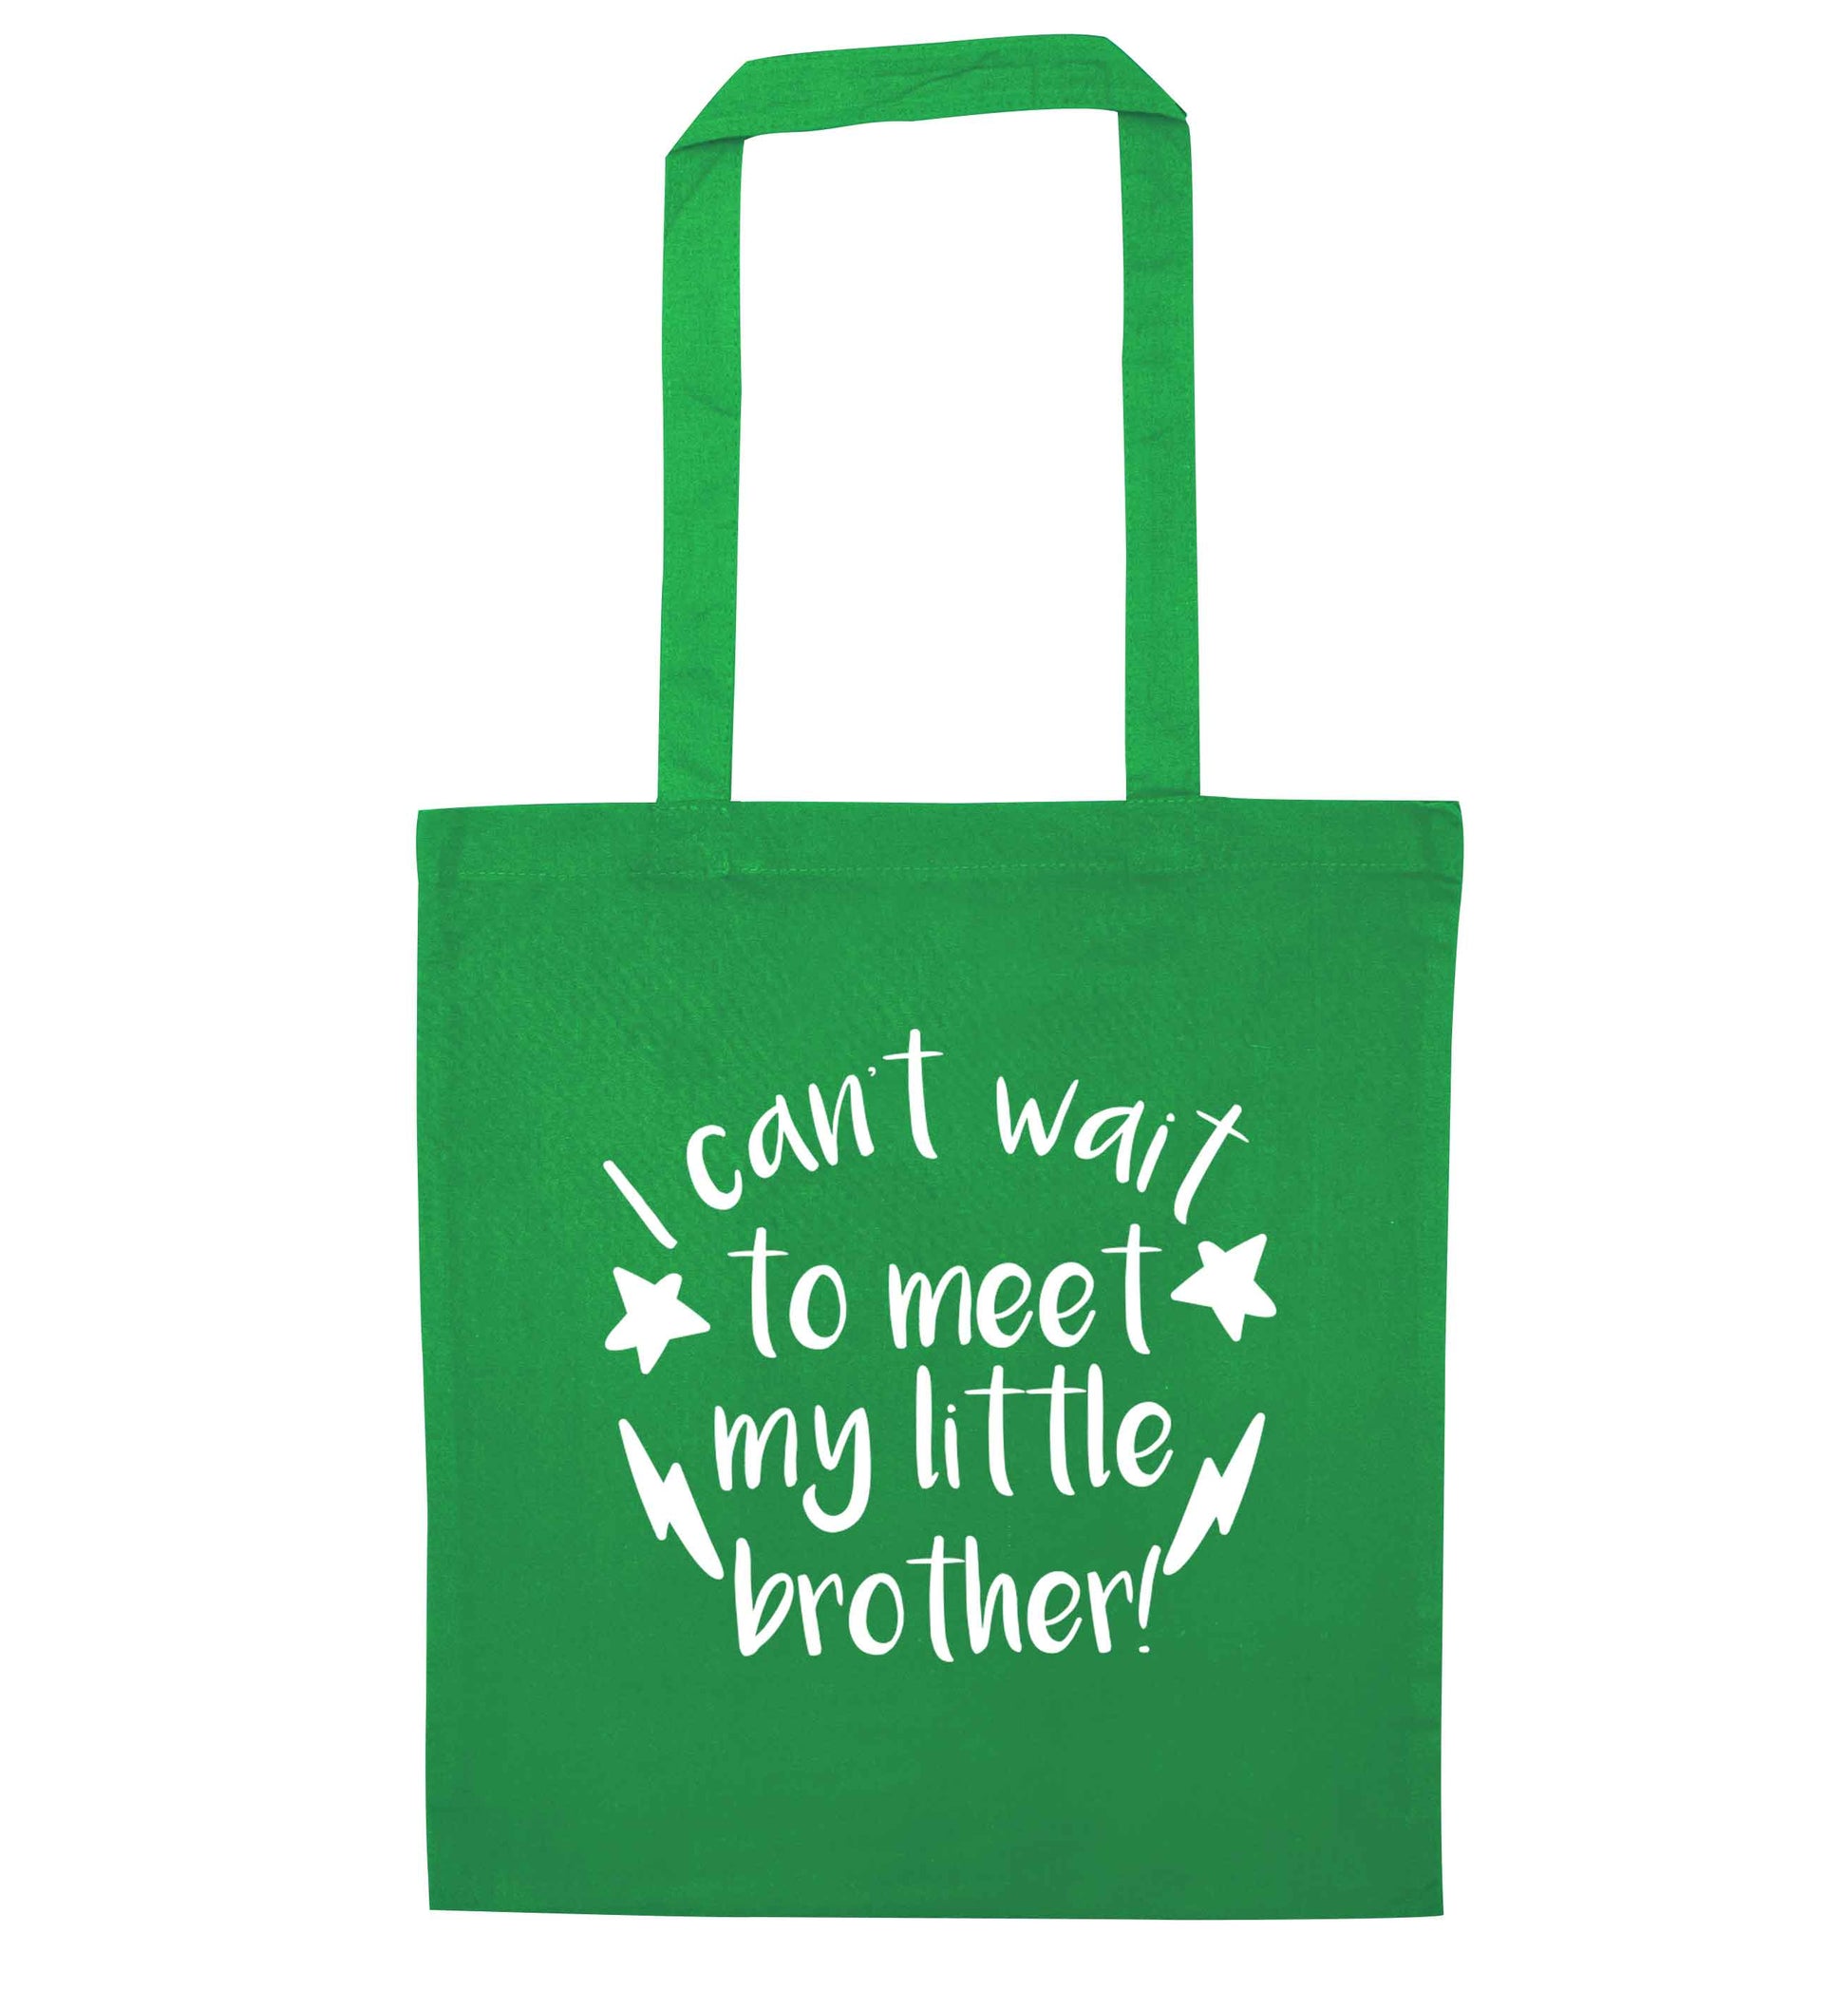 I can't wait to meet my sister! green tote bag